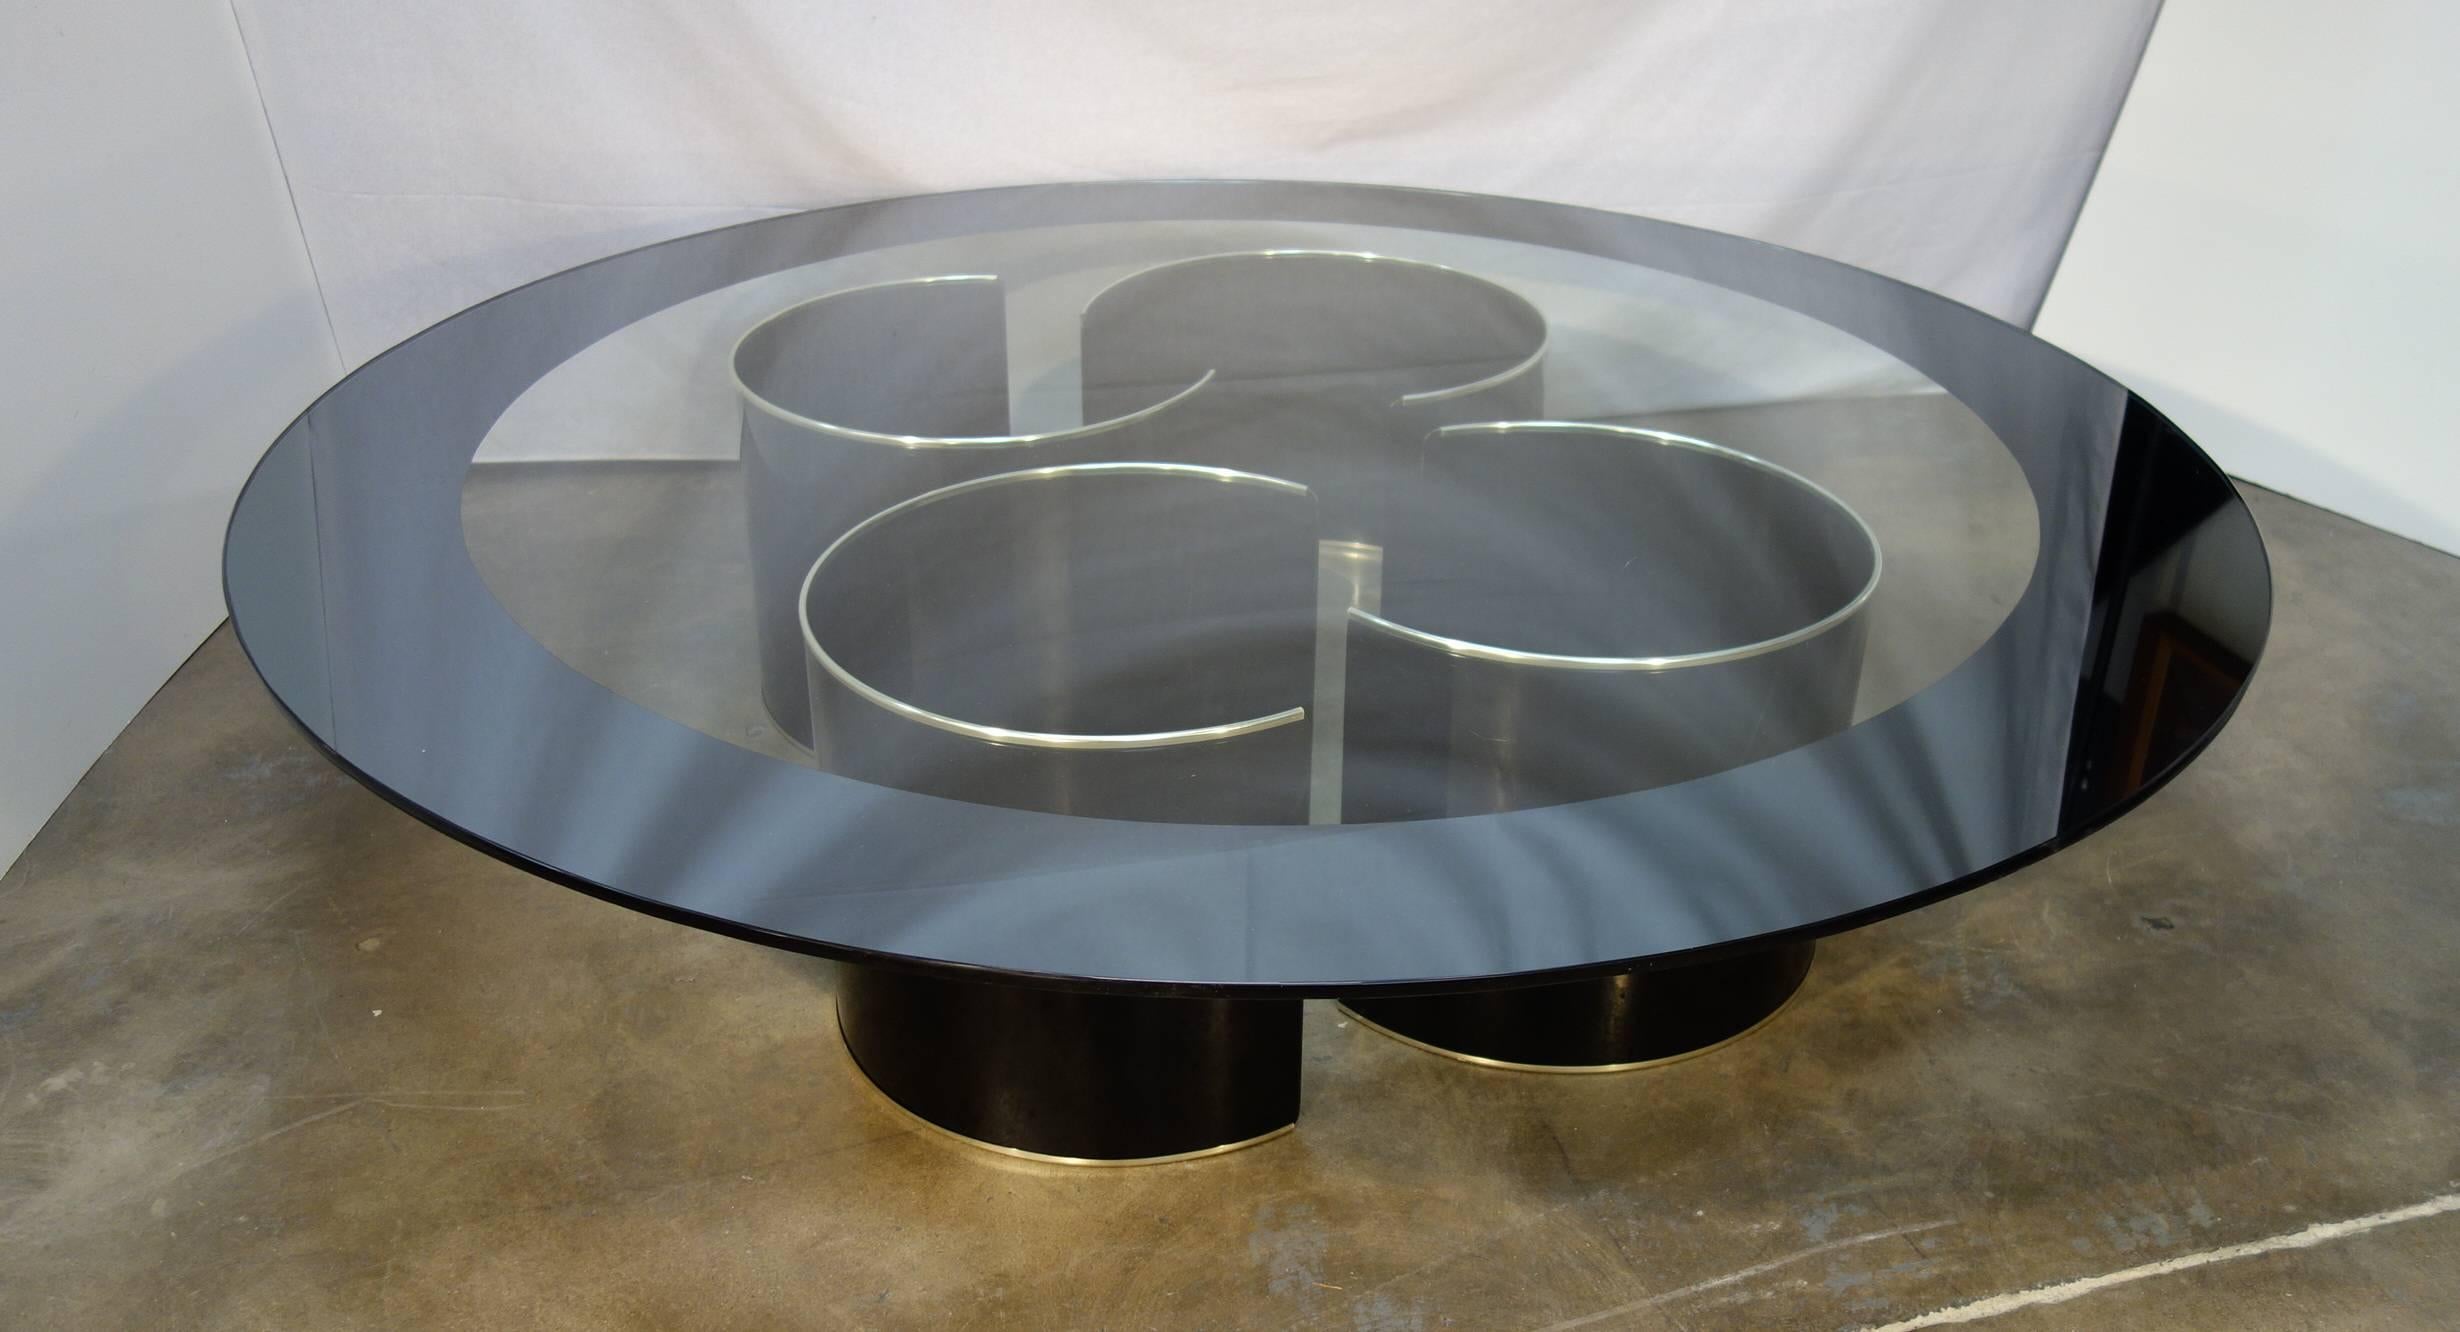 Mid-Century T20 Fascia Specchiata Large Cocktail Table, Luigi Caccia Dominioni Large cocktail table from Azucena, Milan, designed by Italian architect & furniture designer Luigi Caccia Dominioni (b. 7 Dec 1913, d. 13 Nov 2016).  Clear glass top